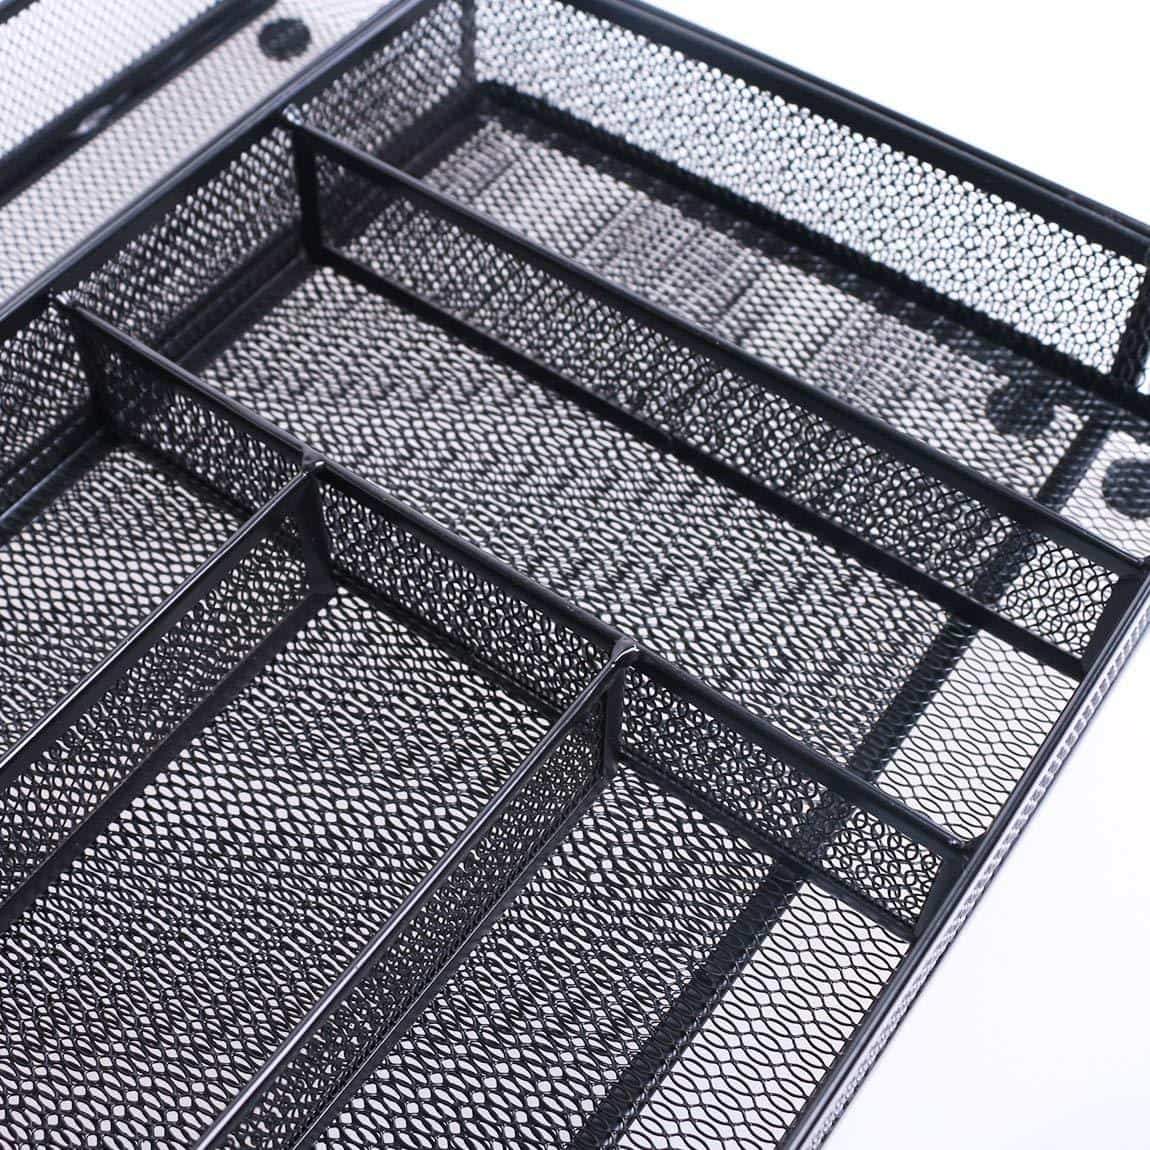 Results szat pro mesh silverware cutlery tray drawer organization kitchen storage flatware utensil organizer for knives spoons forks black expandable